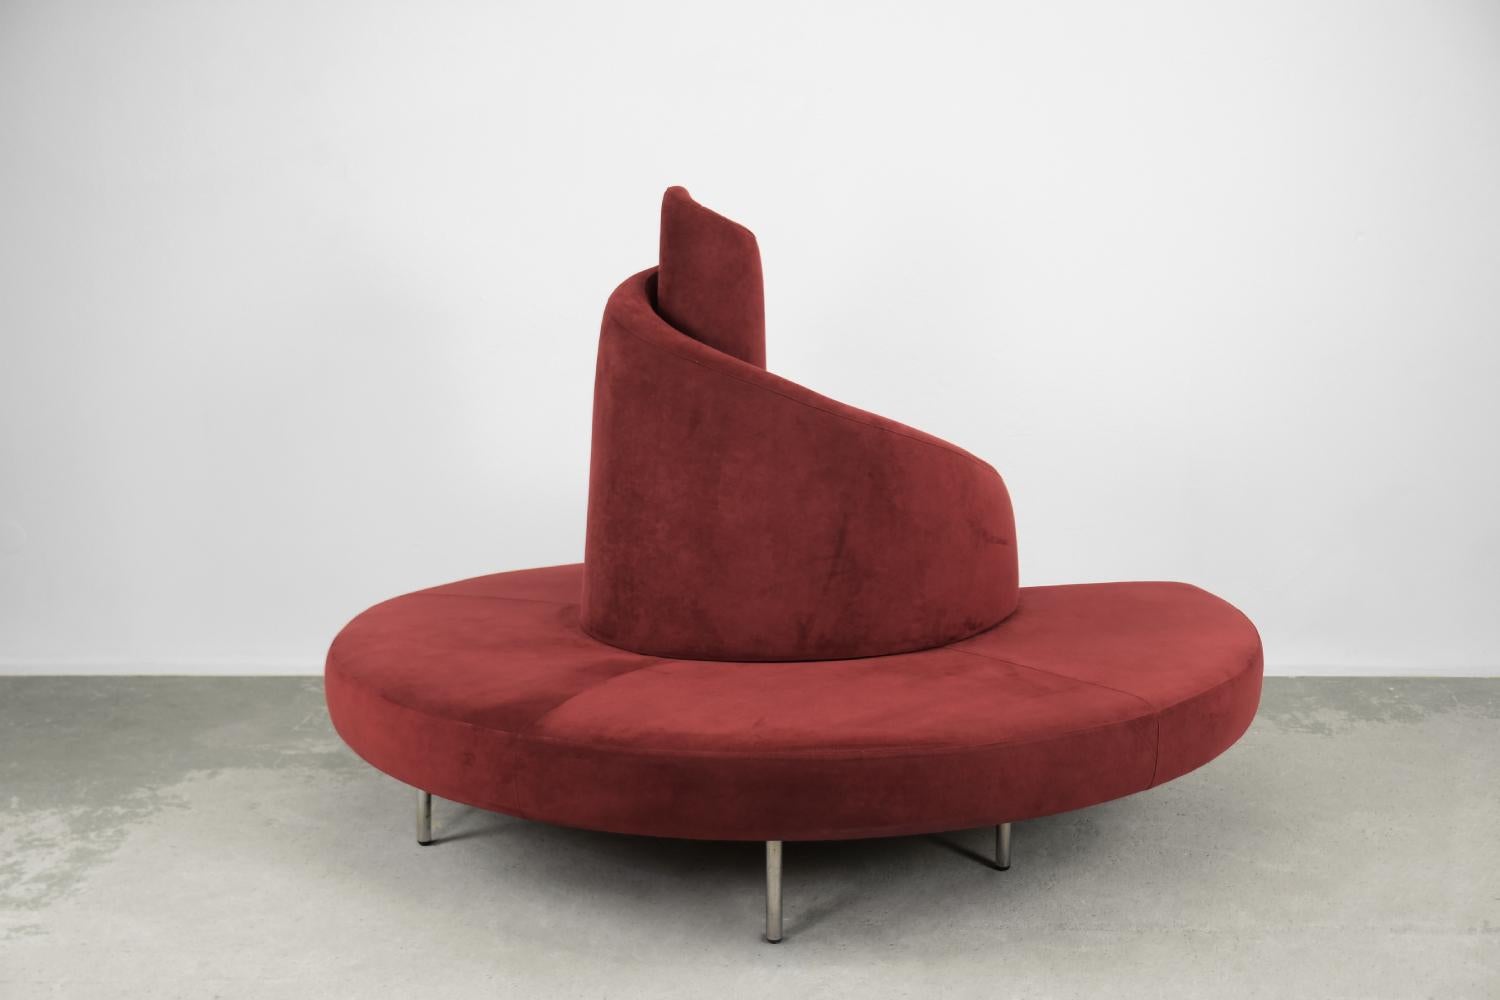 This phenomenal Tatlin sofa was designed by Mario Cananzi and Roberto Semprini for the Italian Edra manufacture in second half of 20th century. Inspired by the famous Tatlin tower, a symbol of constructivism created by Vladimir Tatlin. It is an